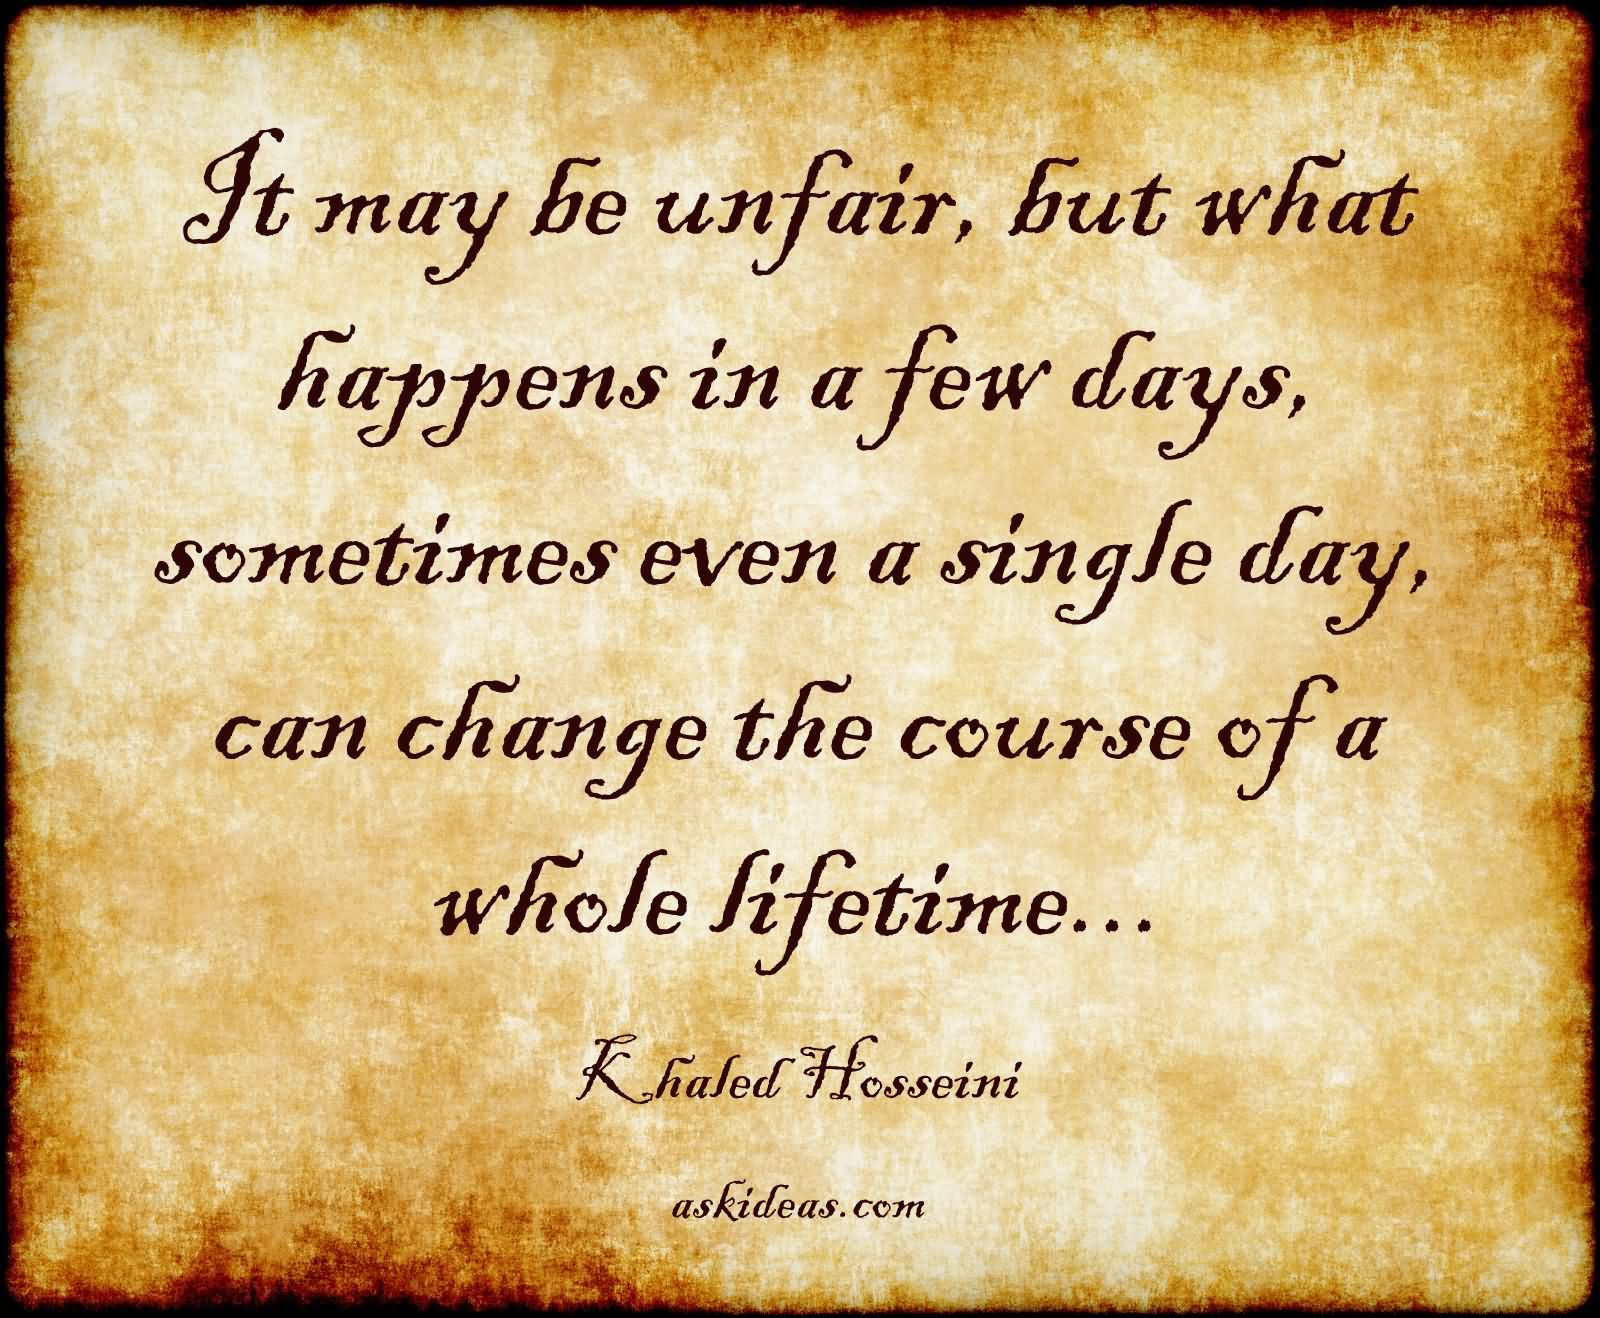 It may be unfair, but what happens in a few days, sometimes even a single day, can change the course of a whole lifetime…